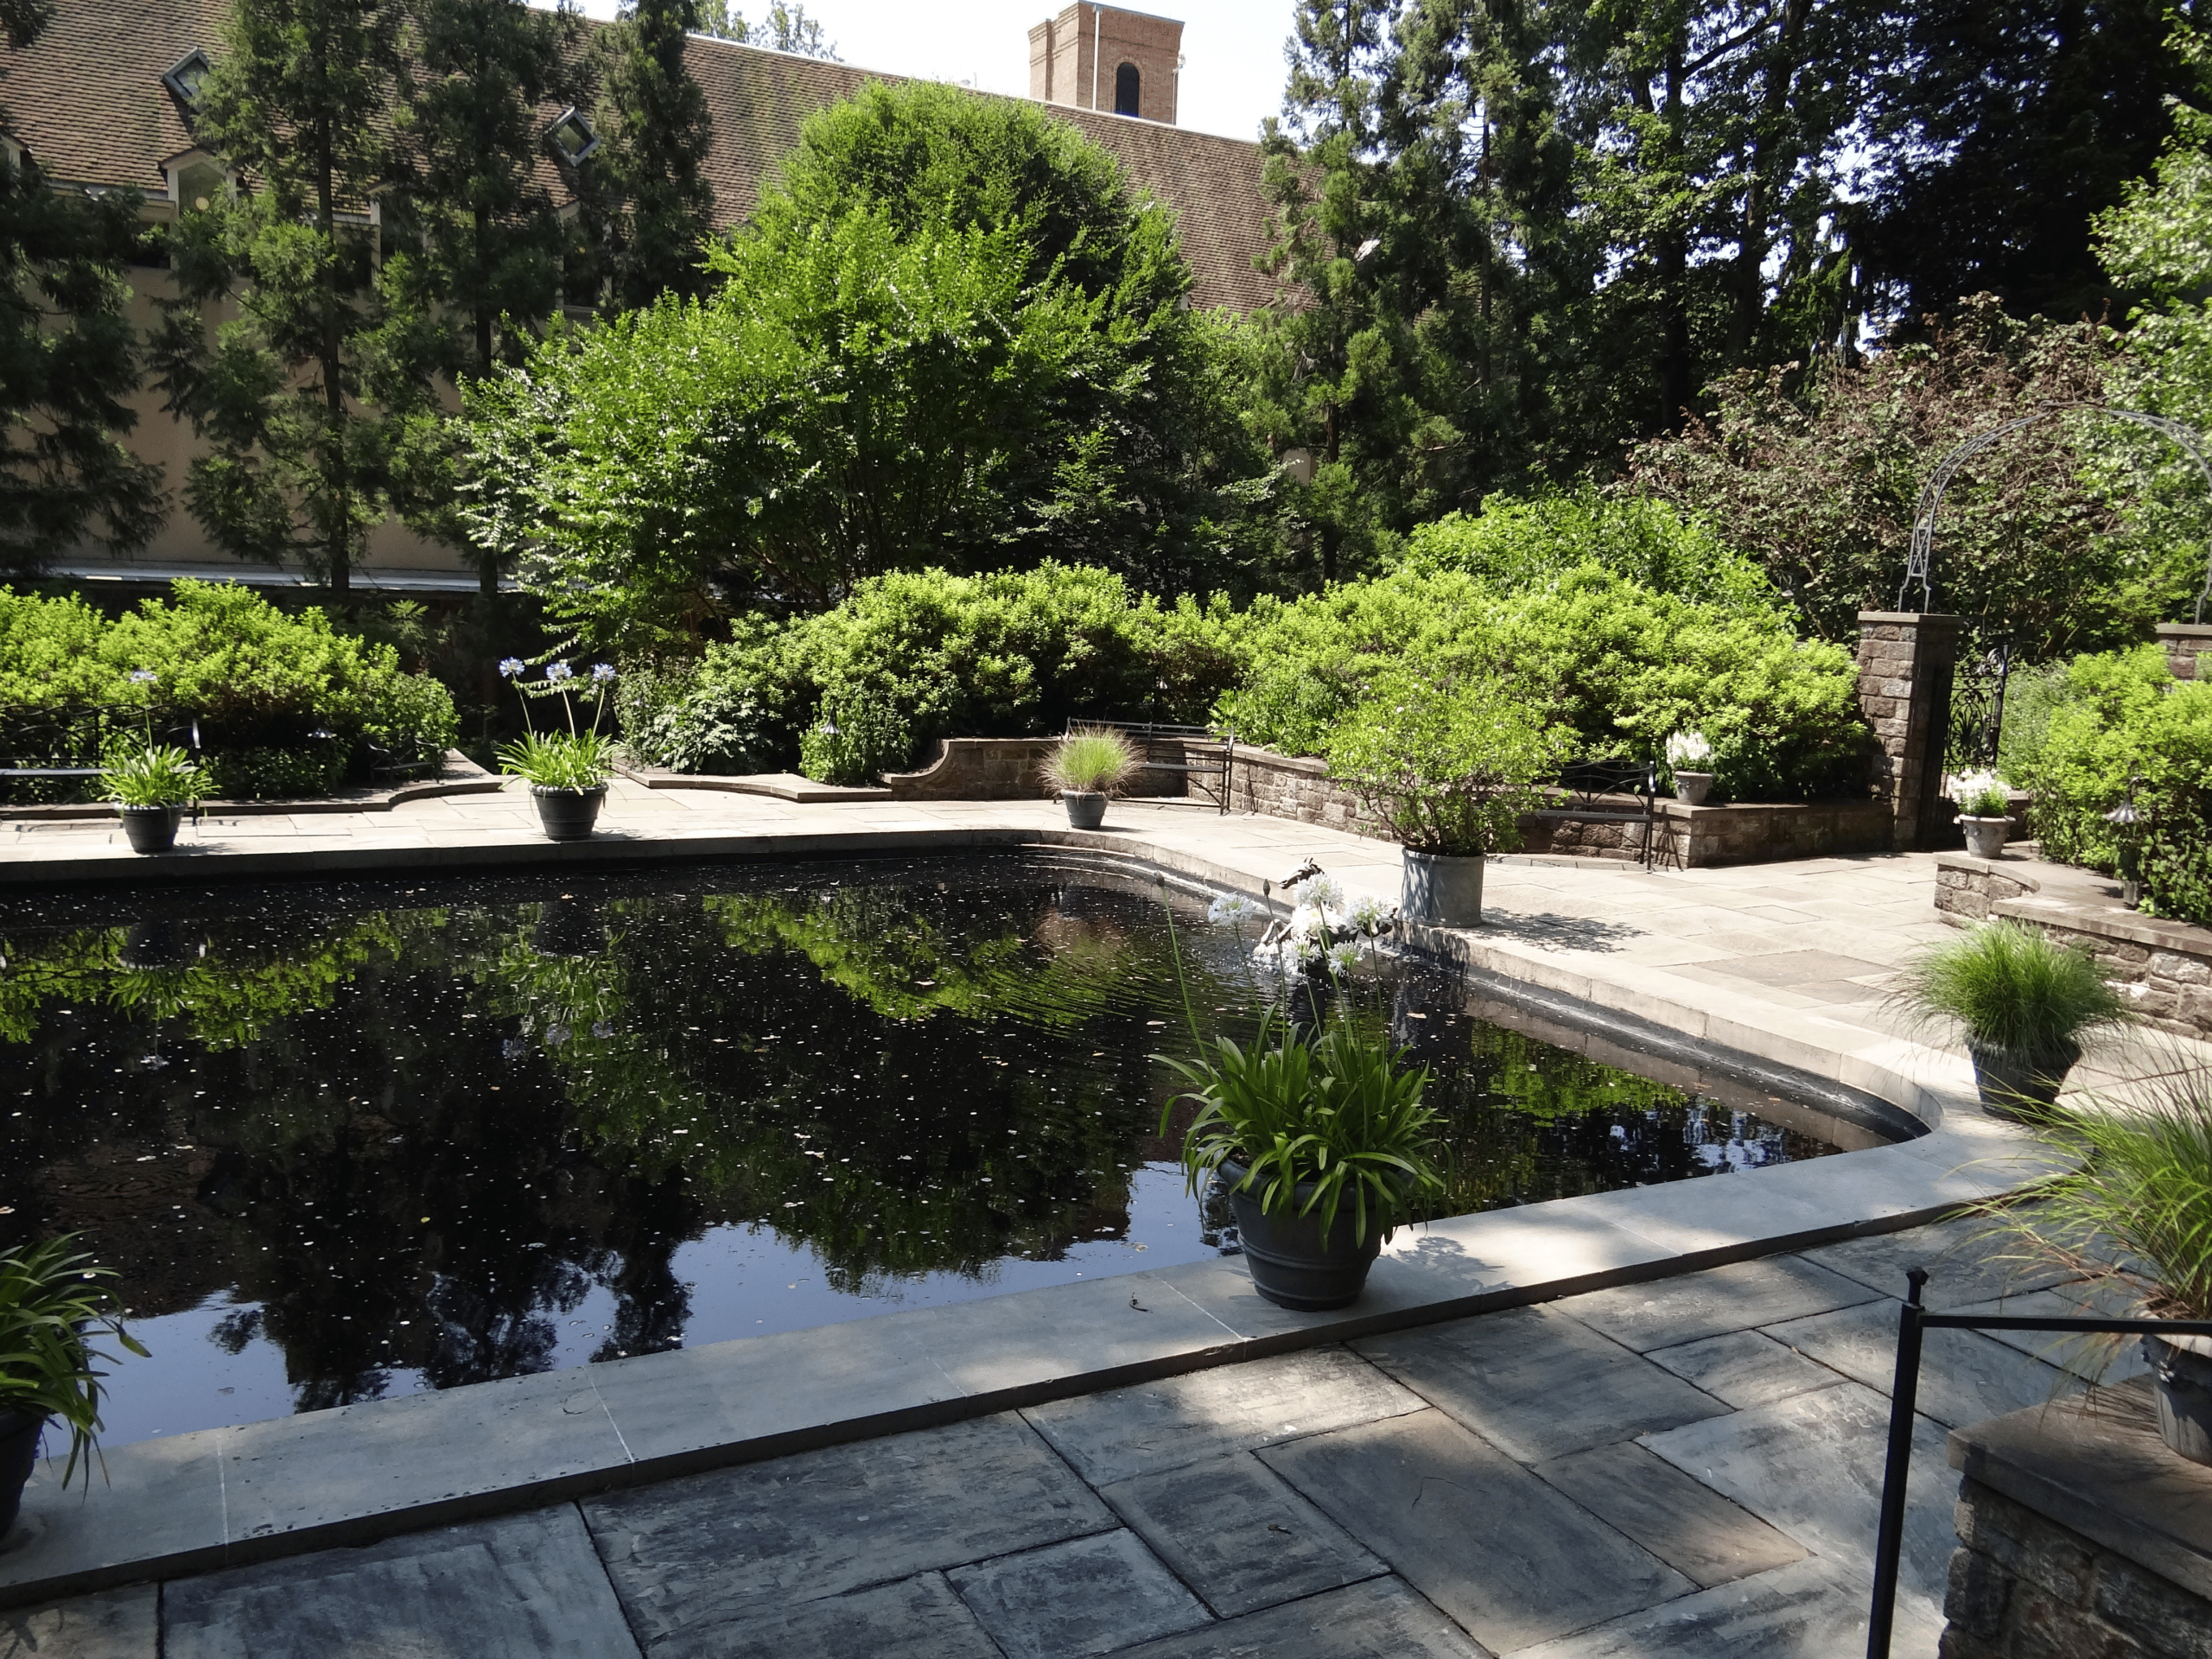 Reflecting Pool garden at the Winterthur estate, designed by Marian Cruger Coffin to serve as the du Pont family's swimming pool